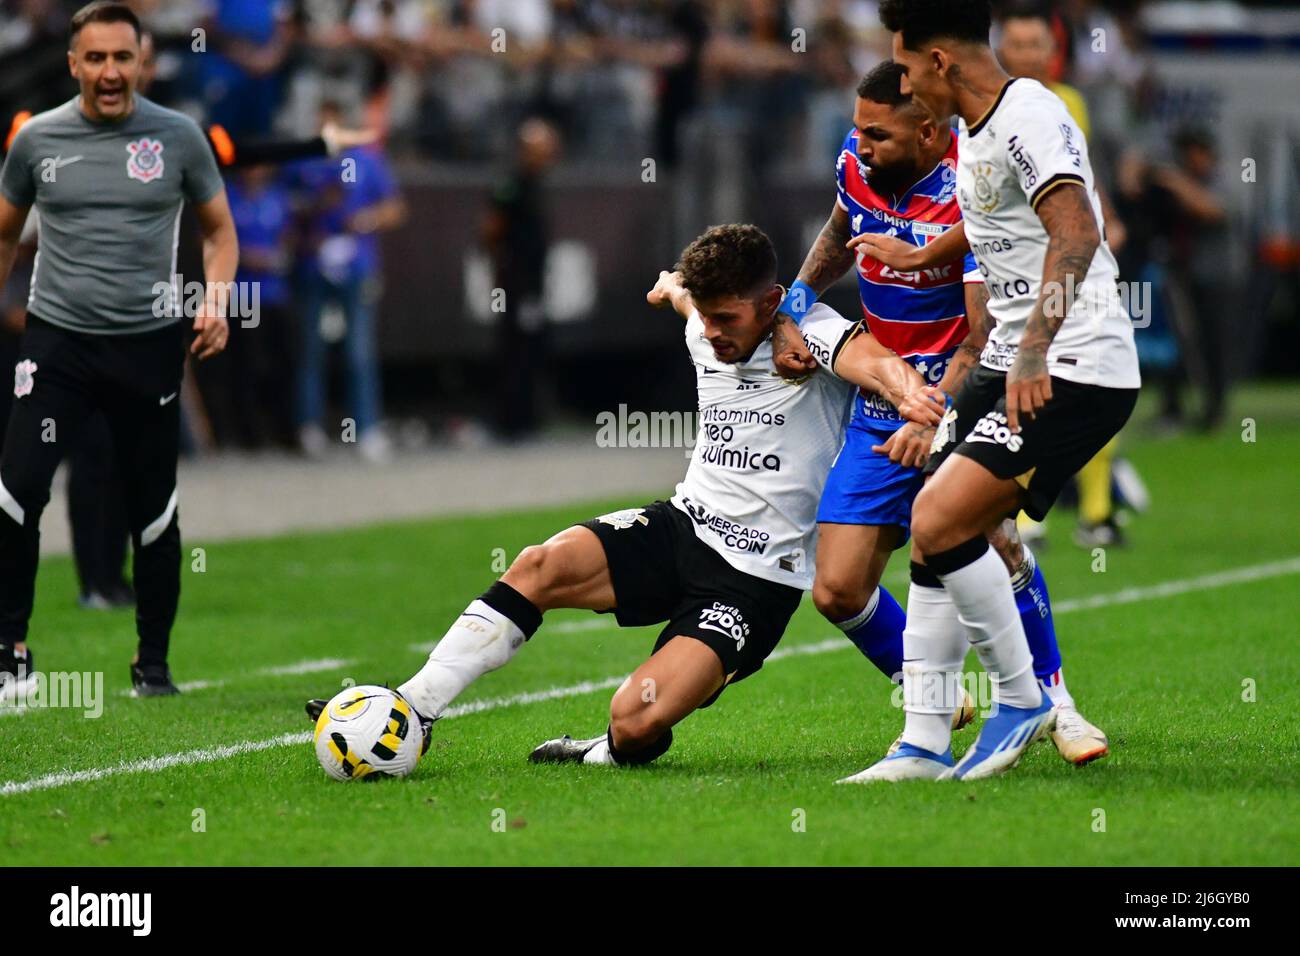 SÃO PAULO, BRASIL - MAY 1: Rafael Ramos of S.C. Corinthians fights for the ball with Romarinho of Fortaleza during Campeonato Brasileiro Série A 2022 match between S.C. Corinthians and Fortaleza at Neo Quimica Arena on May 1, 2022 in Sao Paulo, Brazil. (Photo by Leandro Bernardes/PxImages) Stock Photo